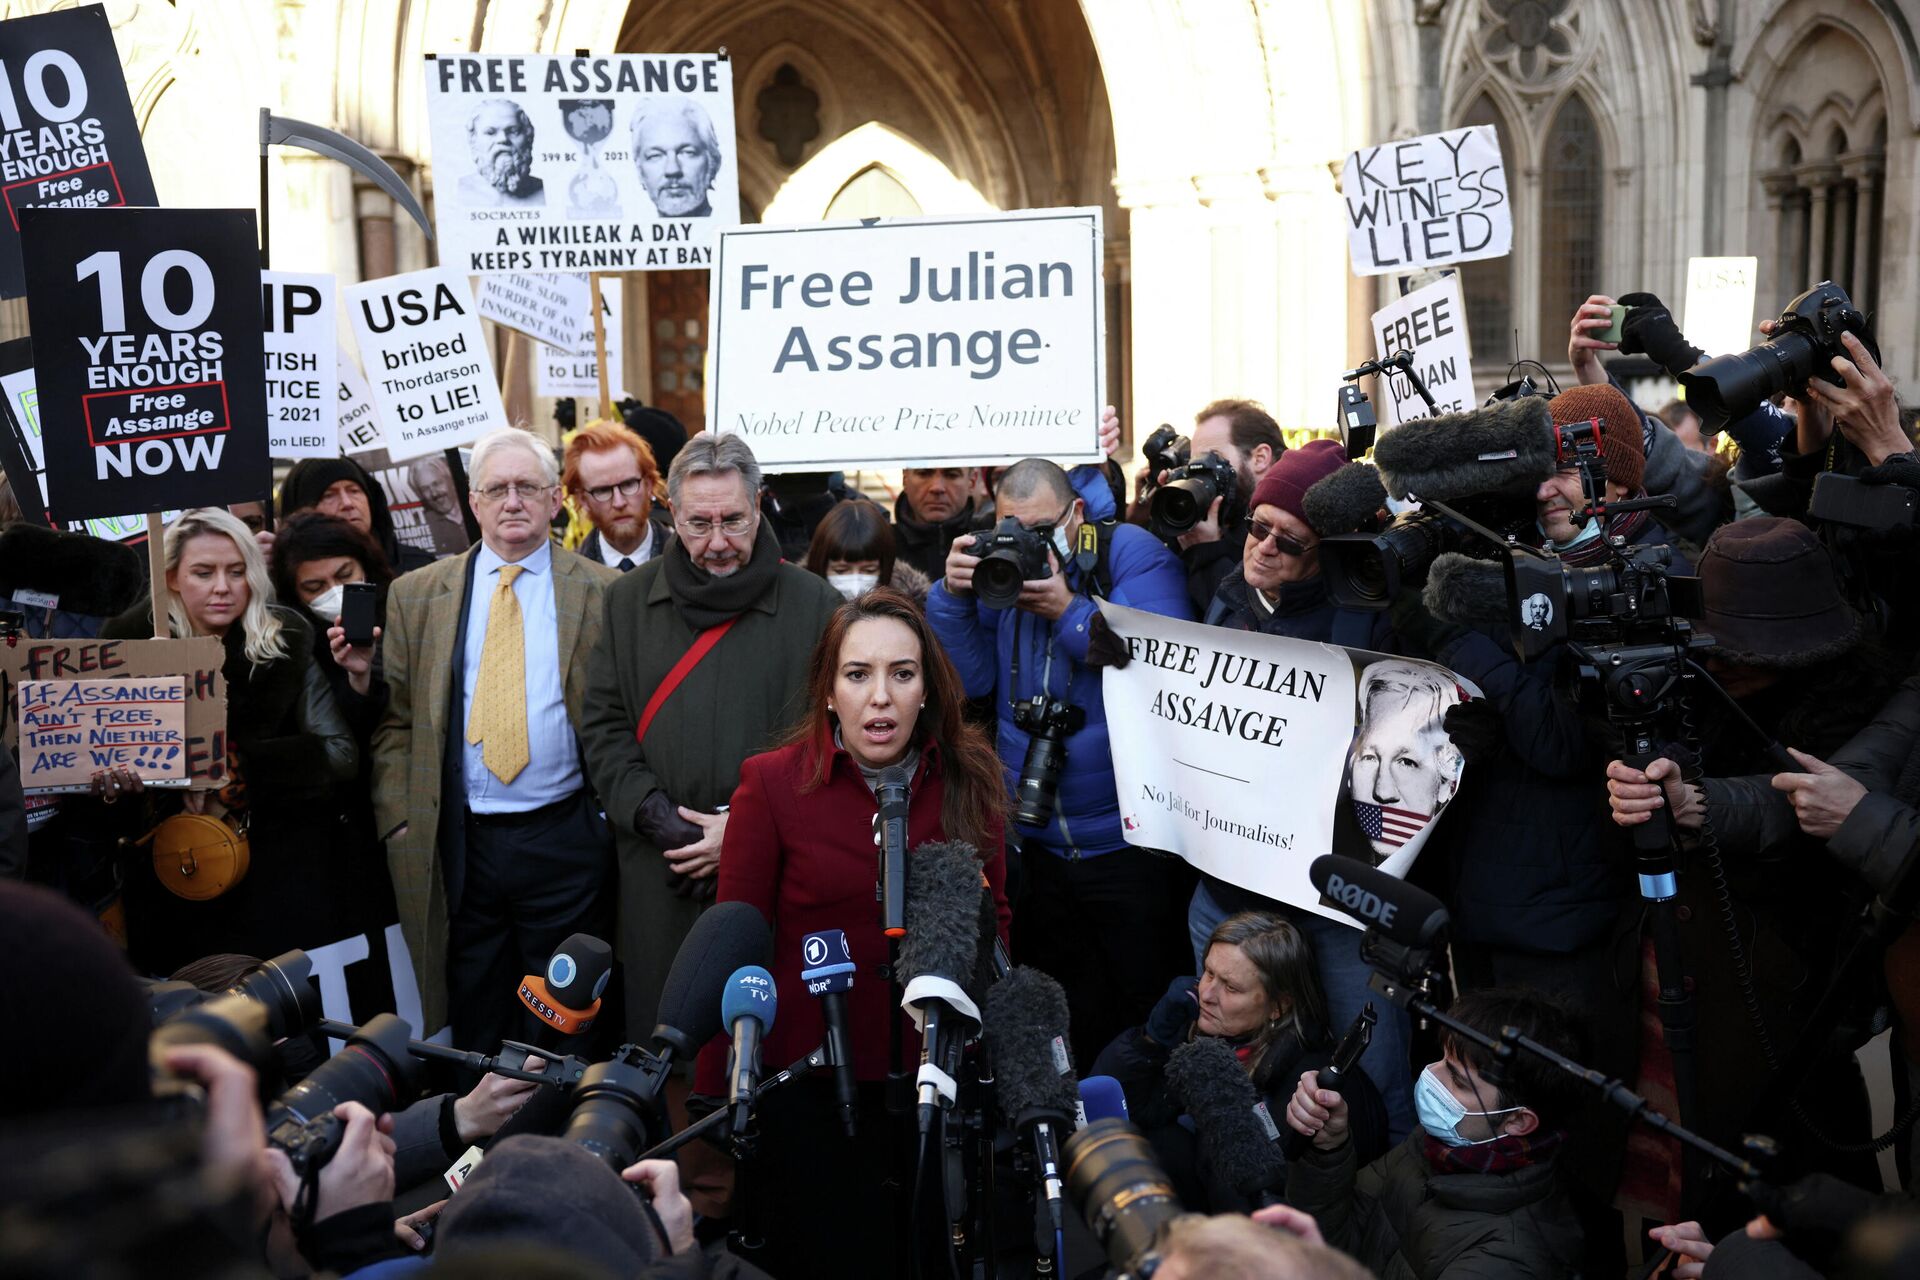 Stella Morris, partner of Wikileaks founder Julian Assange, speaks to media outside the Royal Courts of Justice following the appeal against Assange's extradition in London, Britain December 10, 2021. - Sputnik International, 1920, 11.12.2021